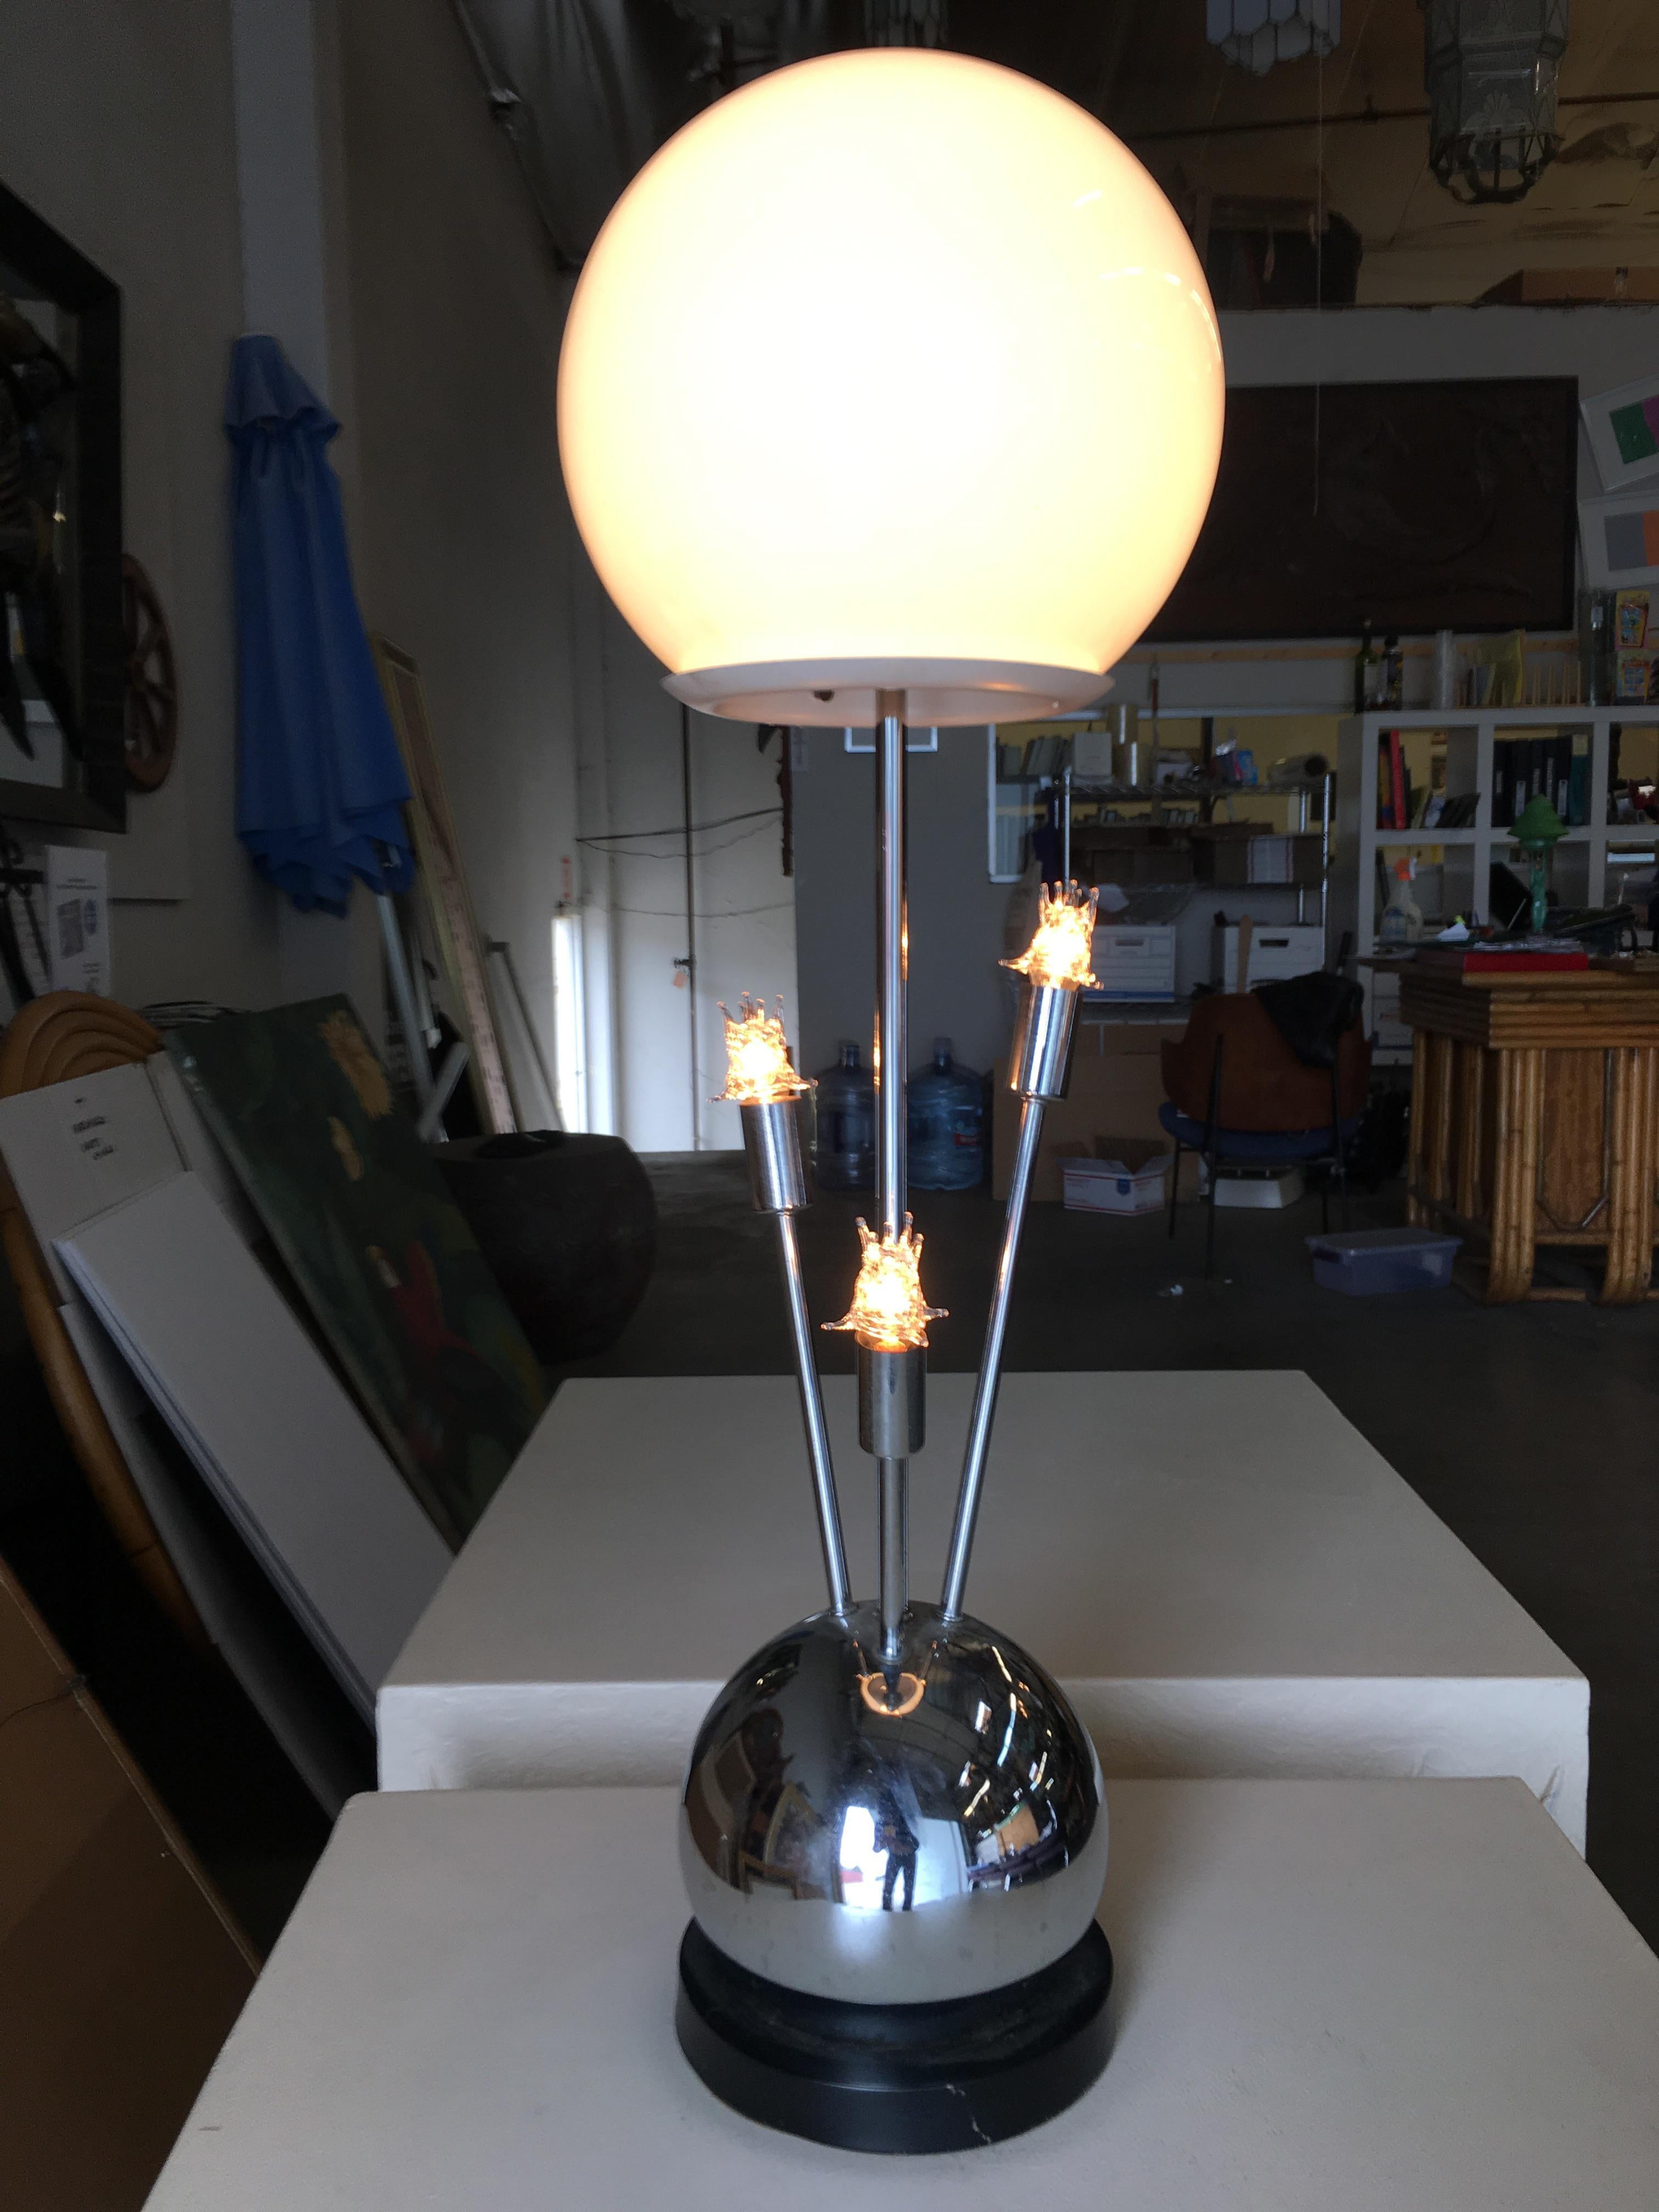 Vintage Space Age chrome ball table lamp with glass globe main light and 3 accent lights branching out from the chrome ball base. Comes with 3-way switch light the top, sides or top and sides together, circa 1970 attributed to Torino.